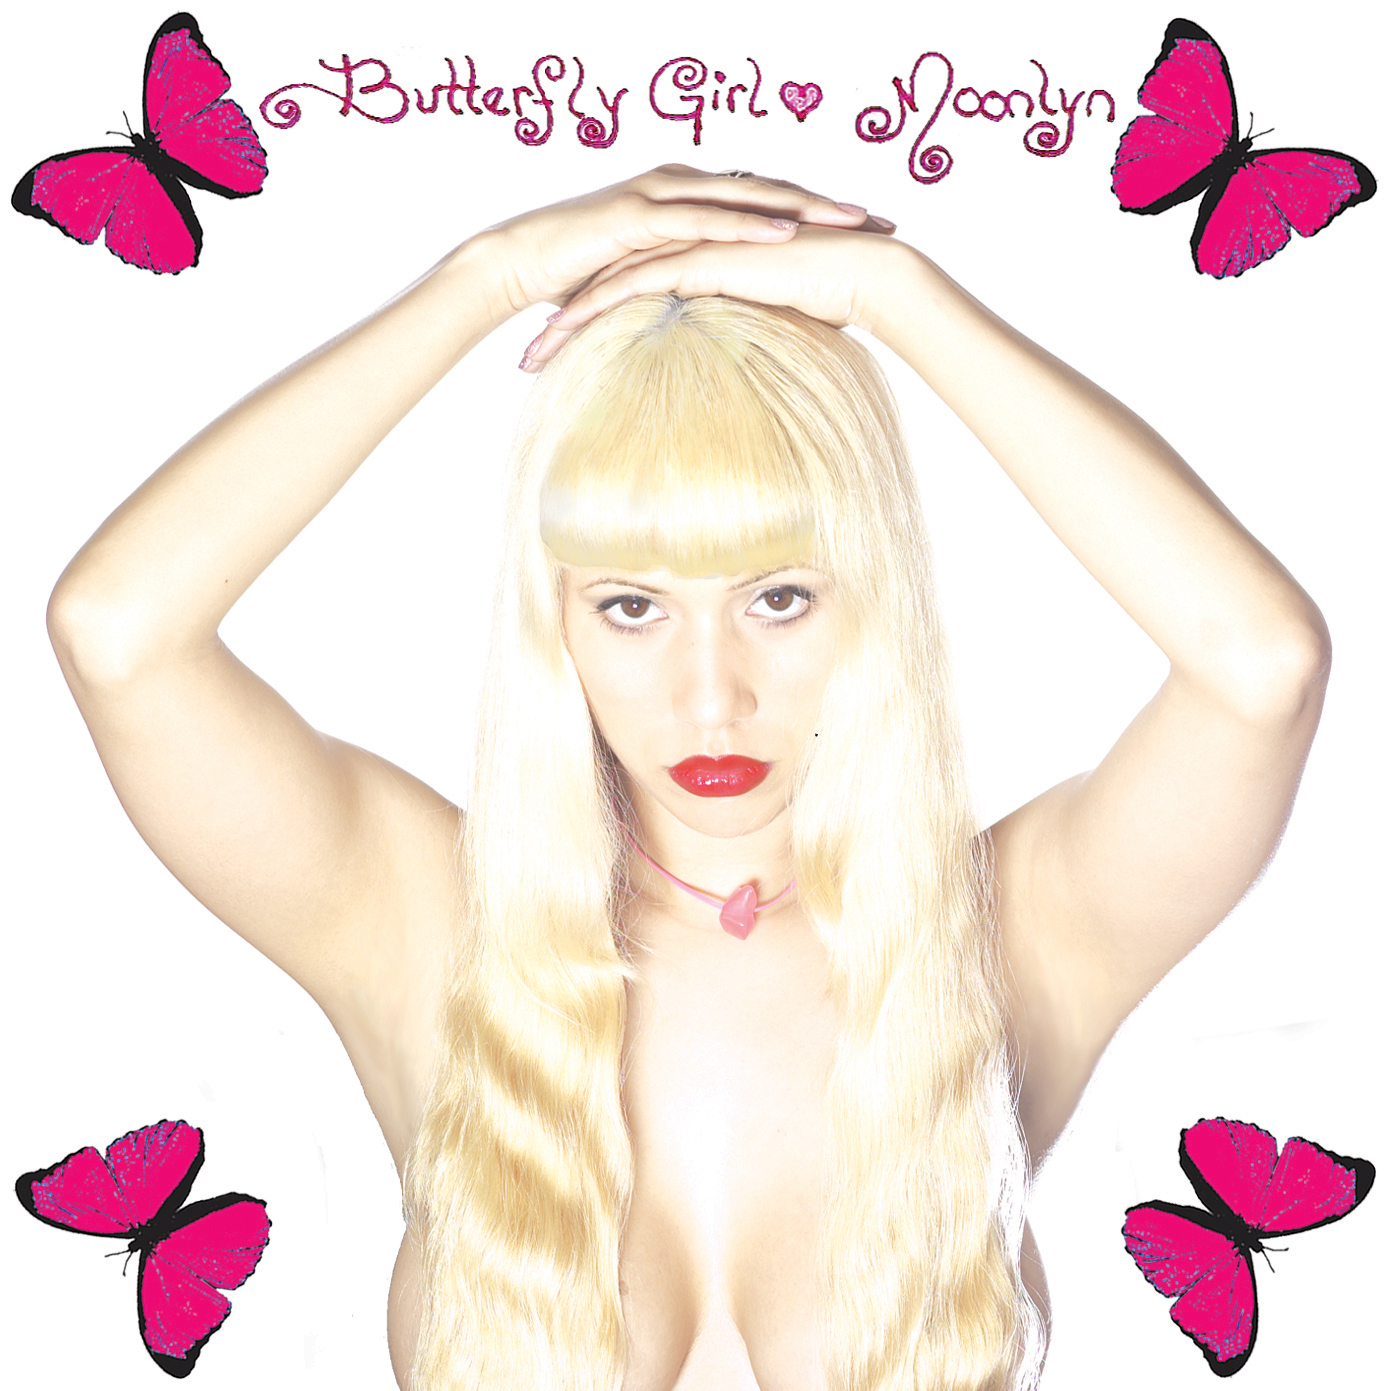 Butterfly_Girl_Album_Cover.jpg Happiness, La la la la, Song, Angels Sing Peace, Angel music, Angellic song, Peace Song, Blondes Prefer Gentlemen, Storm, Fairy Tale, Lolita, Lolita Your Beauty Can Kill, Butterfly Girl, Moonlyn, Butterfly Girl song, Butterfly Girl album, Butterfly Girl music, Moonlyn music, Blondes Prefer Gentlemen, Gentlemen Prefer Blondes, Marilyn Monroe, I Wanna Be Loved By You, Jayne Mansfield, Jayne Mansfield Look-a-like, blonde bombshell, Silent Night